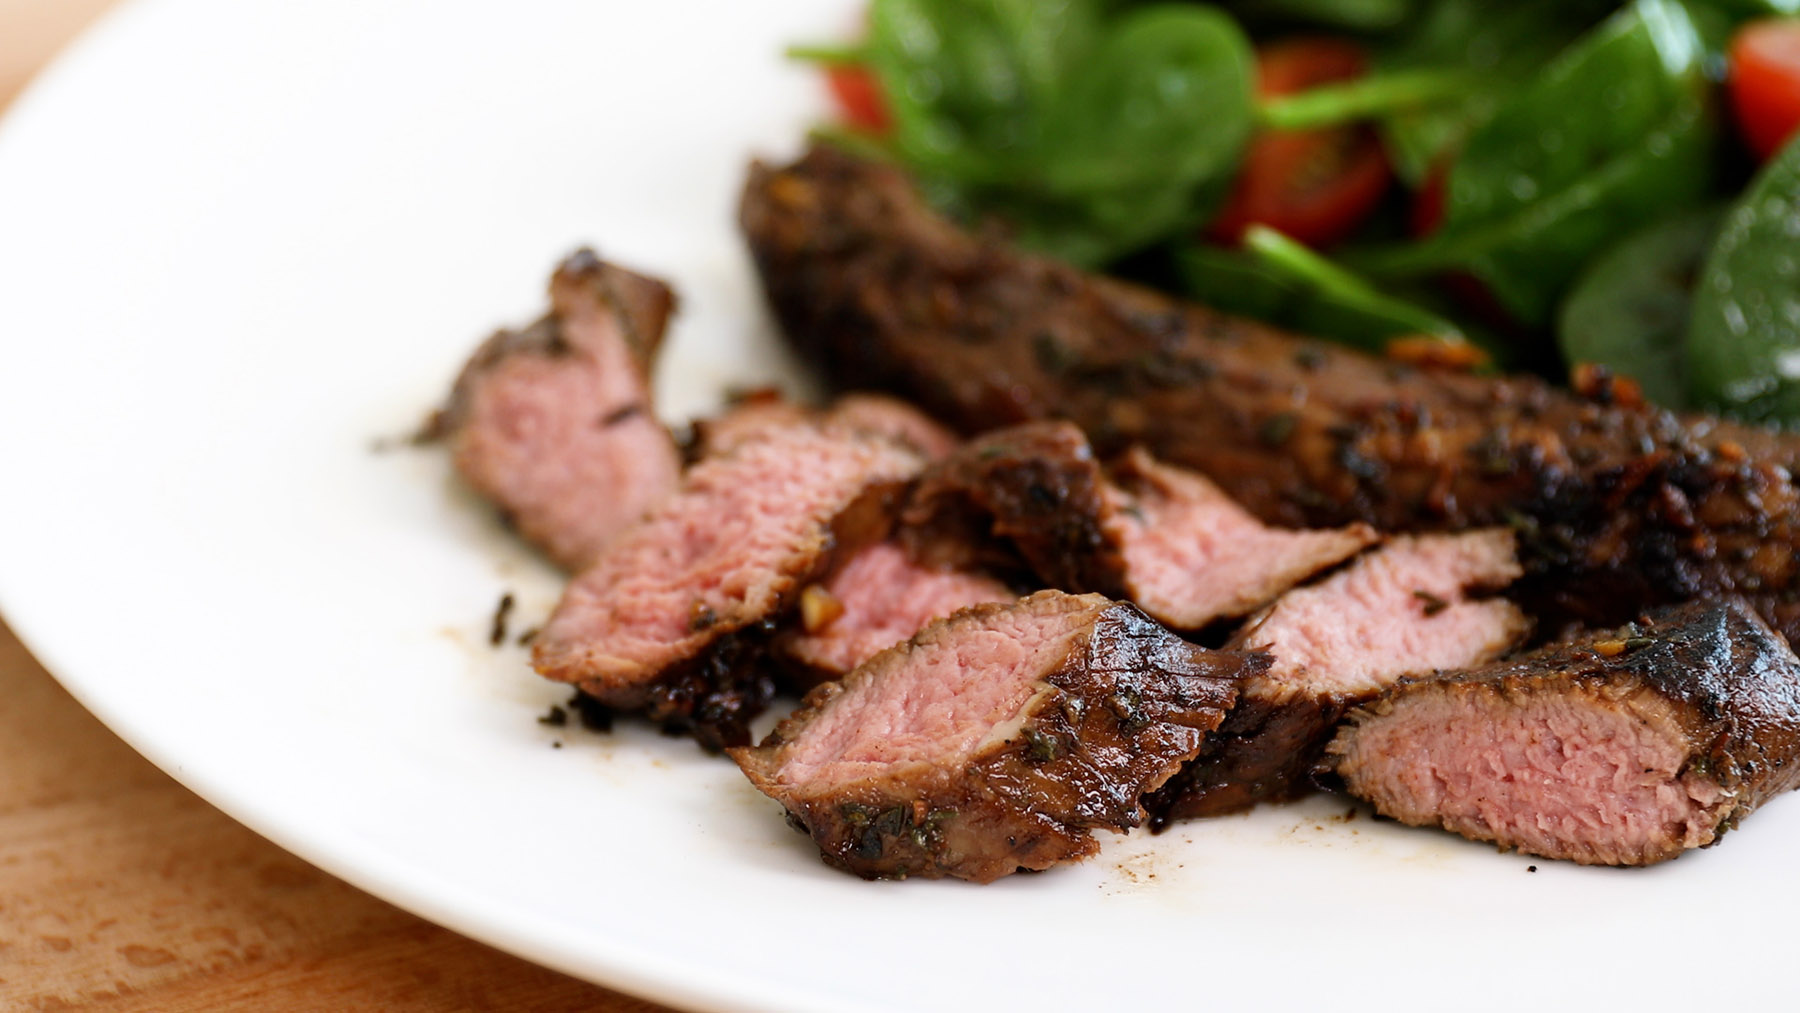 Rosemary and Balsamic Lamb Steaks with Baby Spinach Salad Recipe